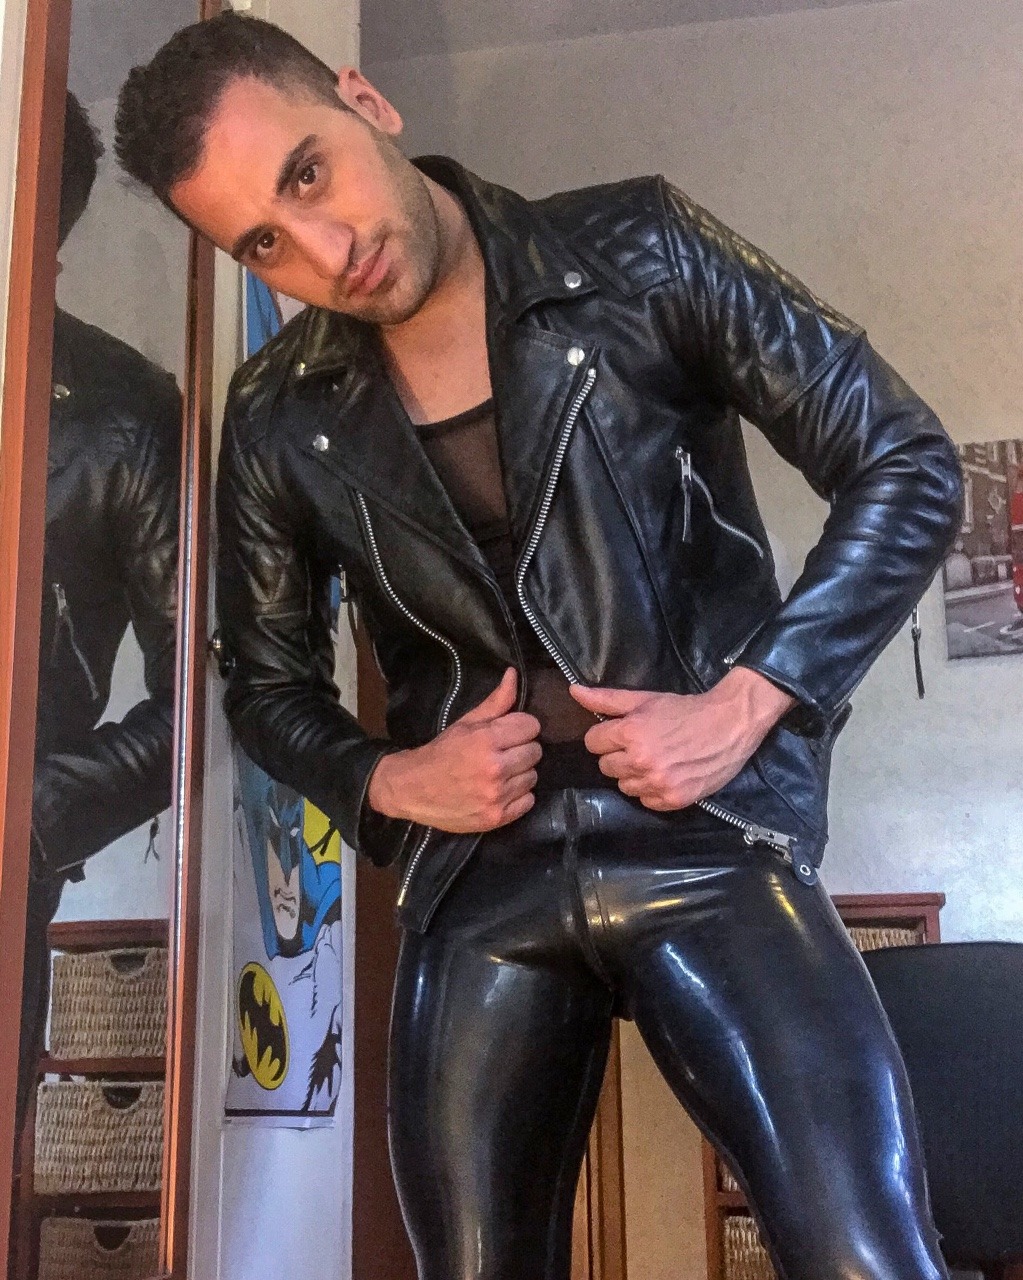 You know you love leather and latex when after 3 seconds of looking at this picture,